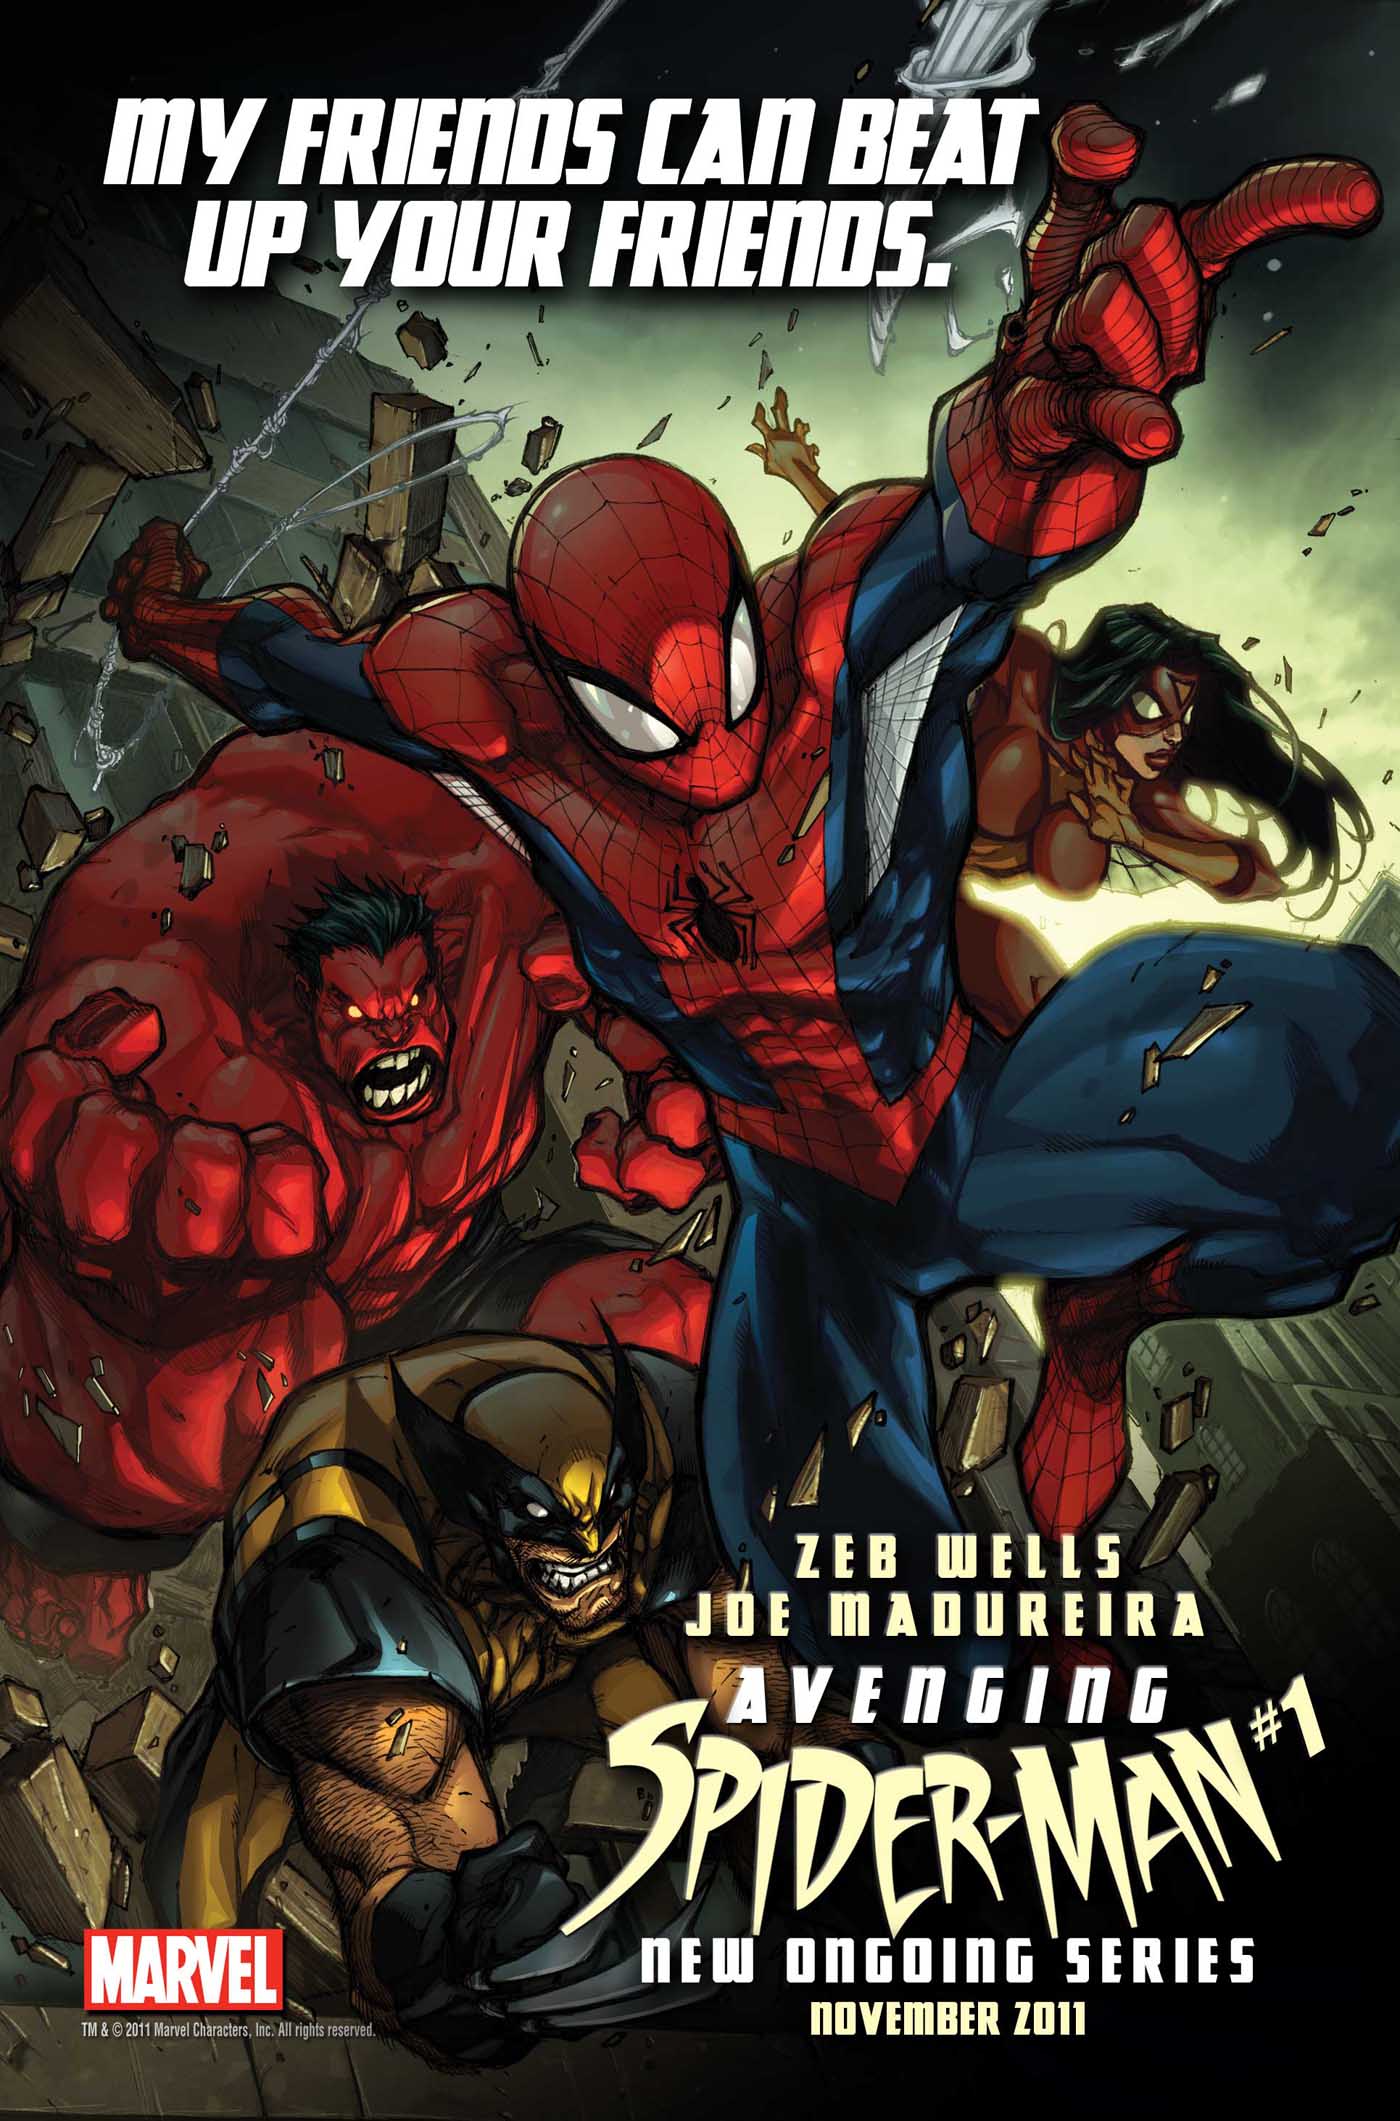 Avenging Spider-Man #1 preview